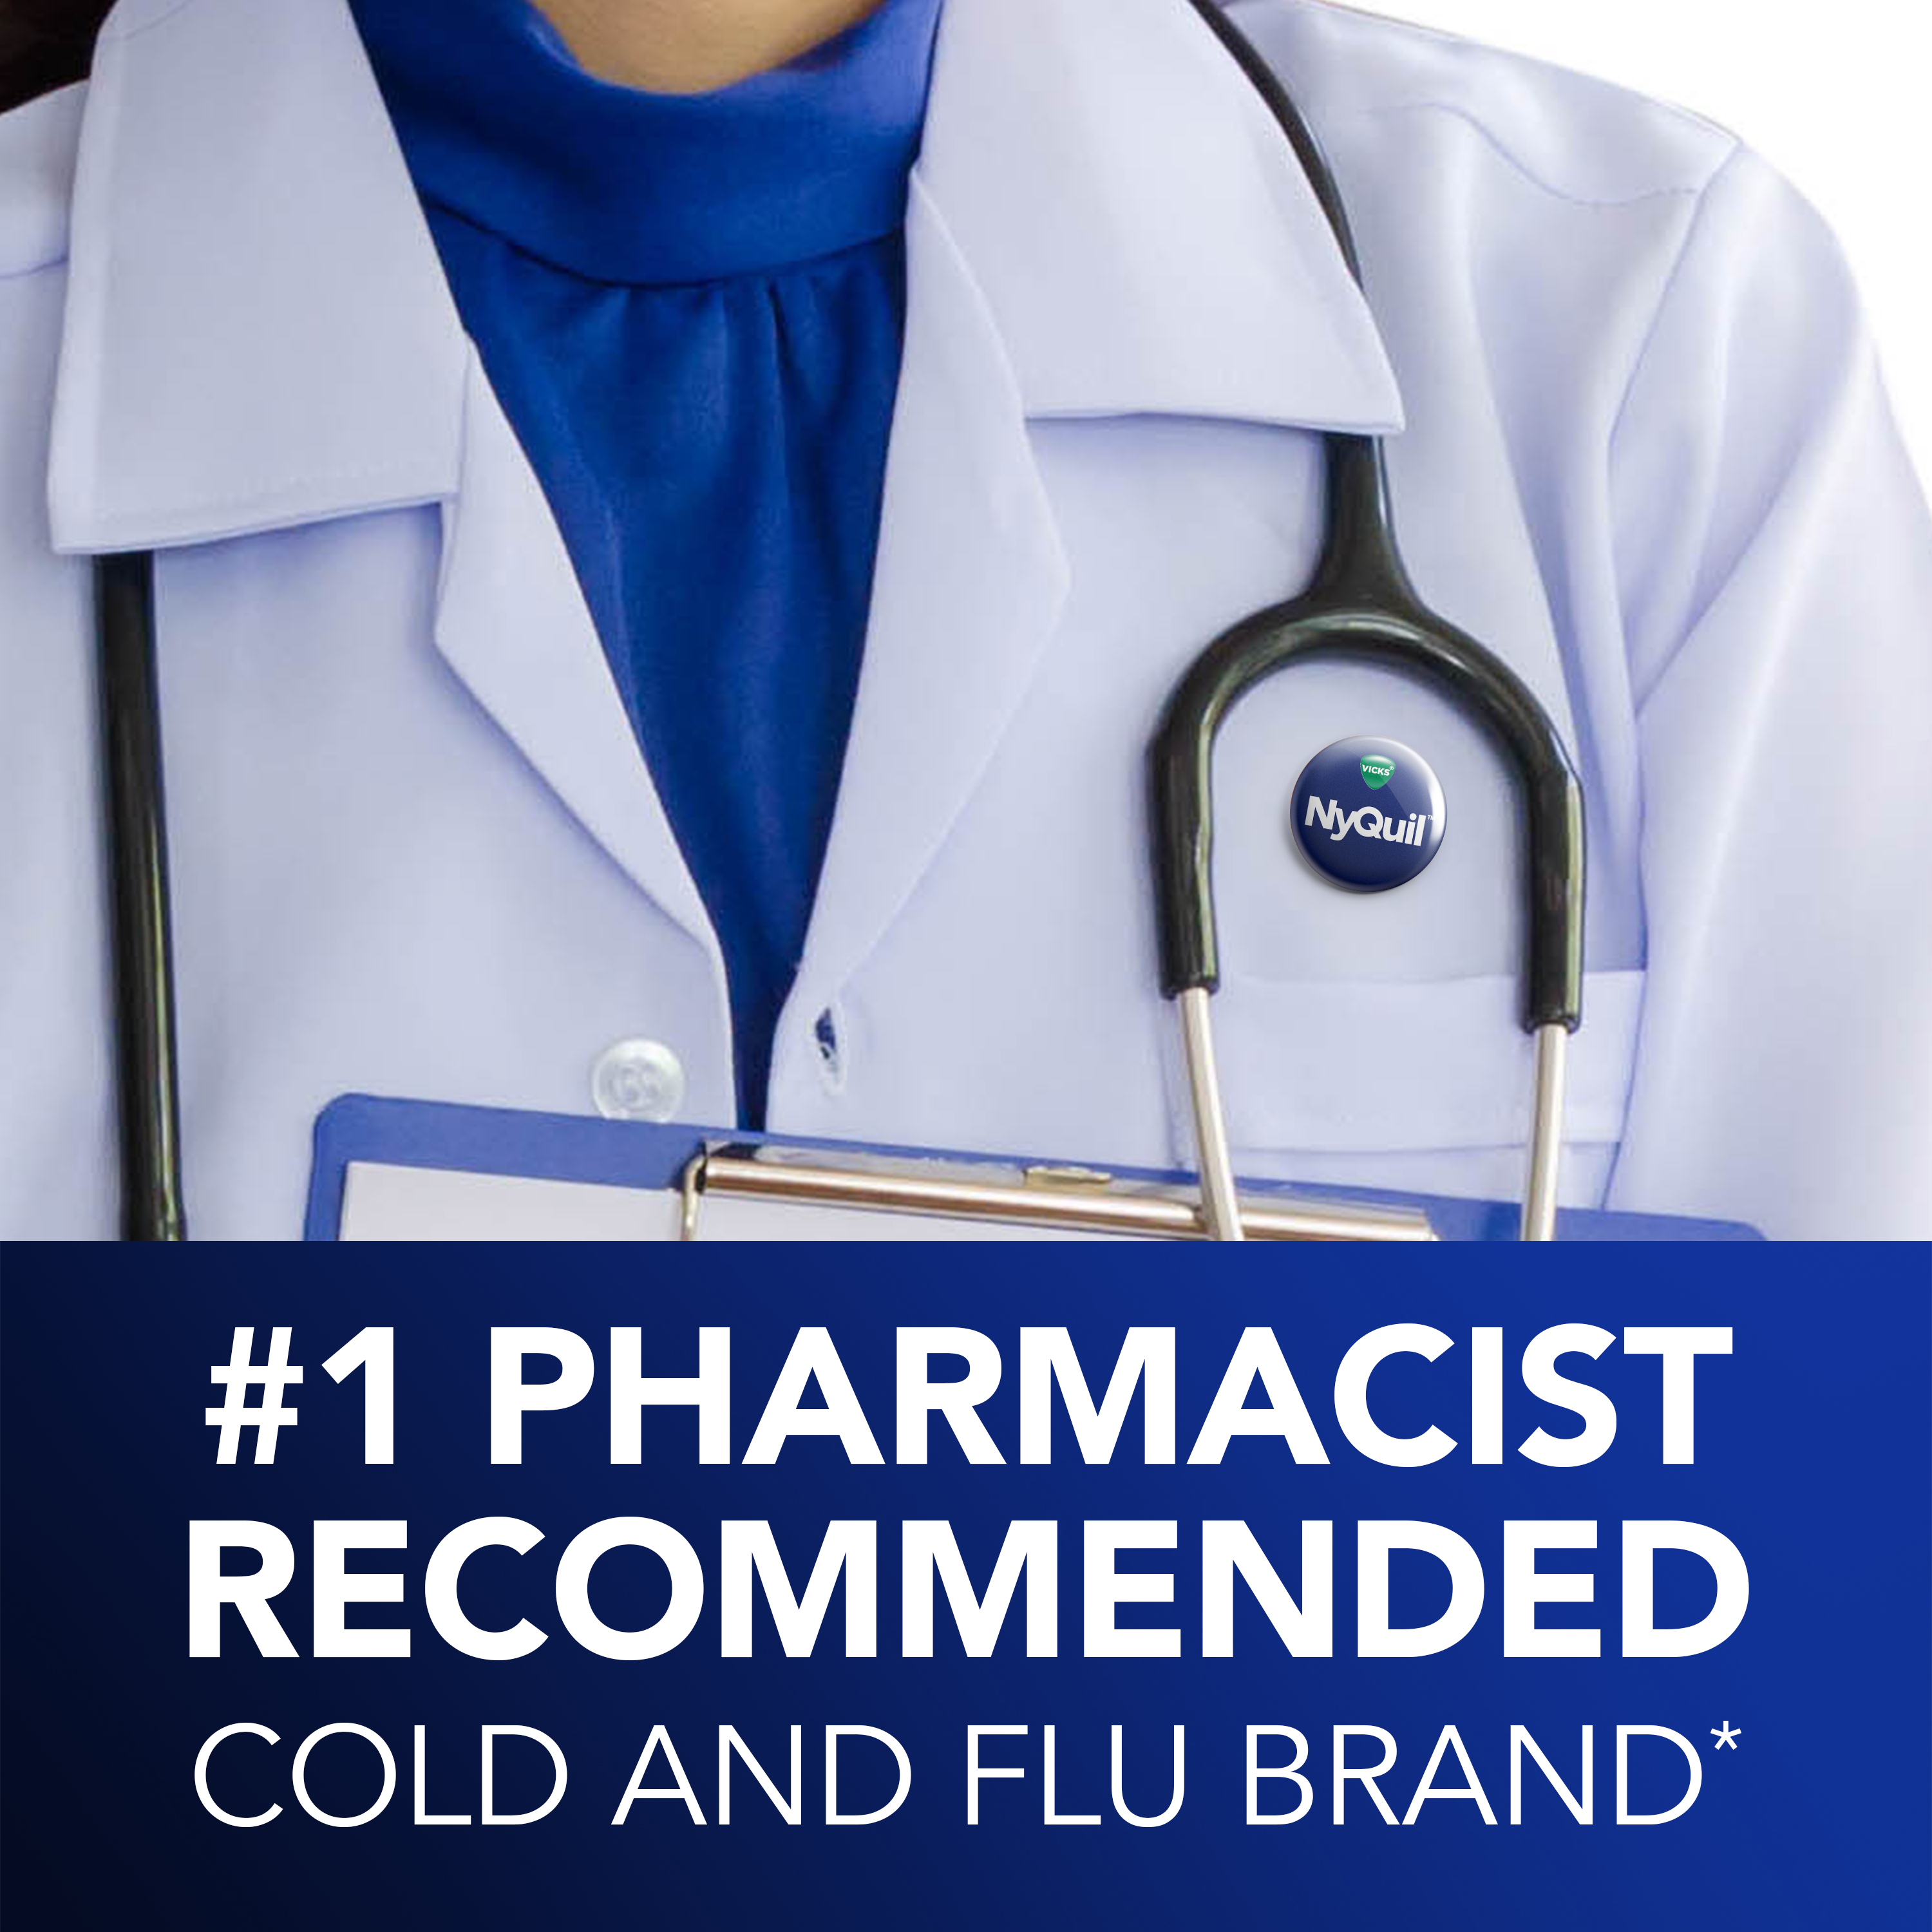 #1 Pharmacist recommended cold and flu brand